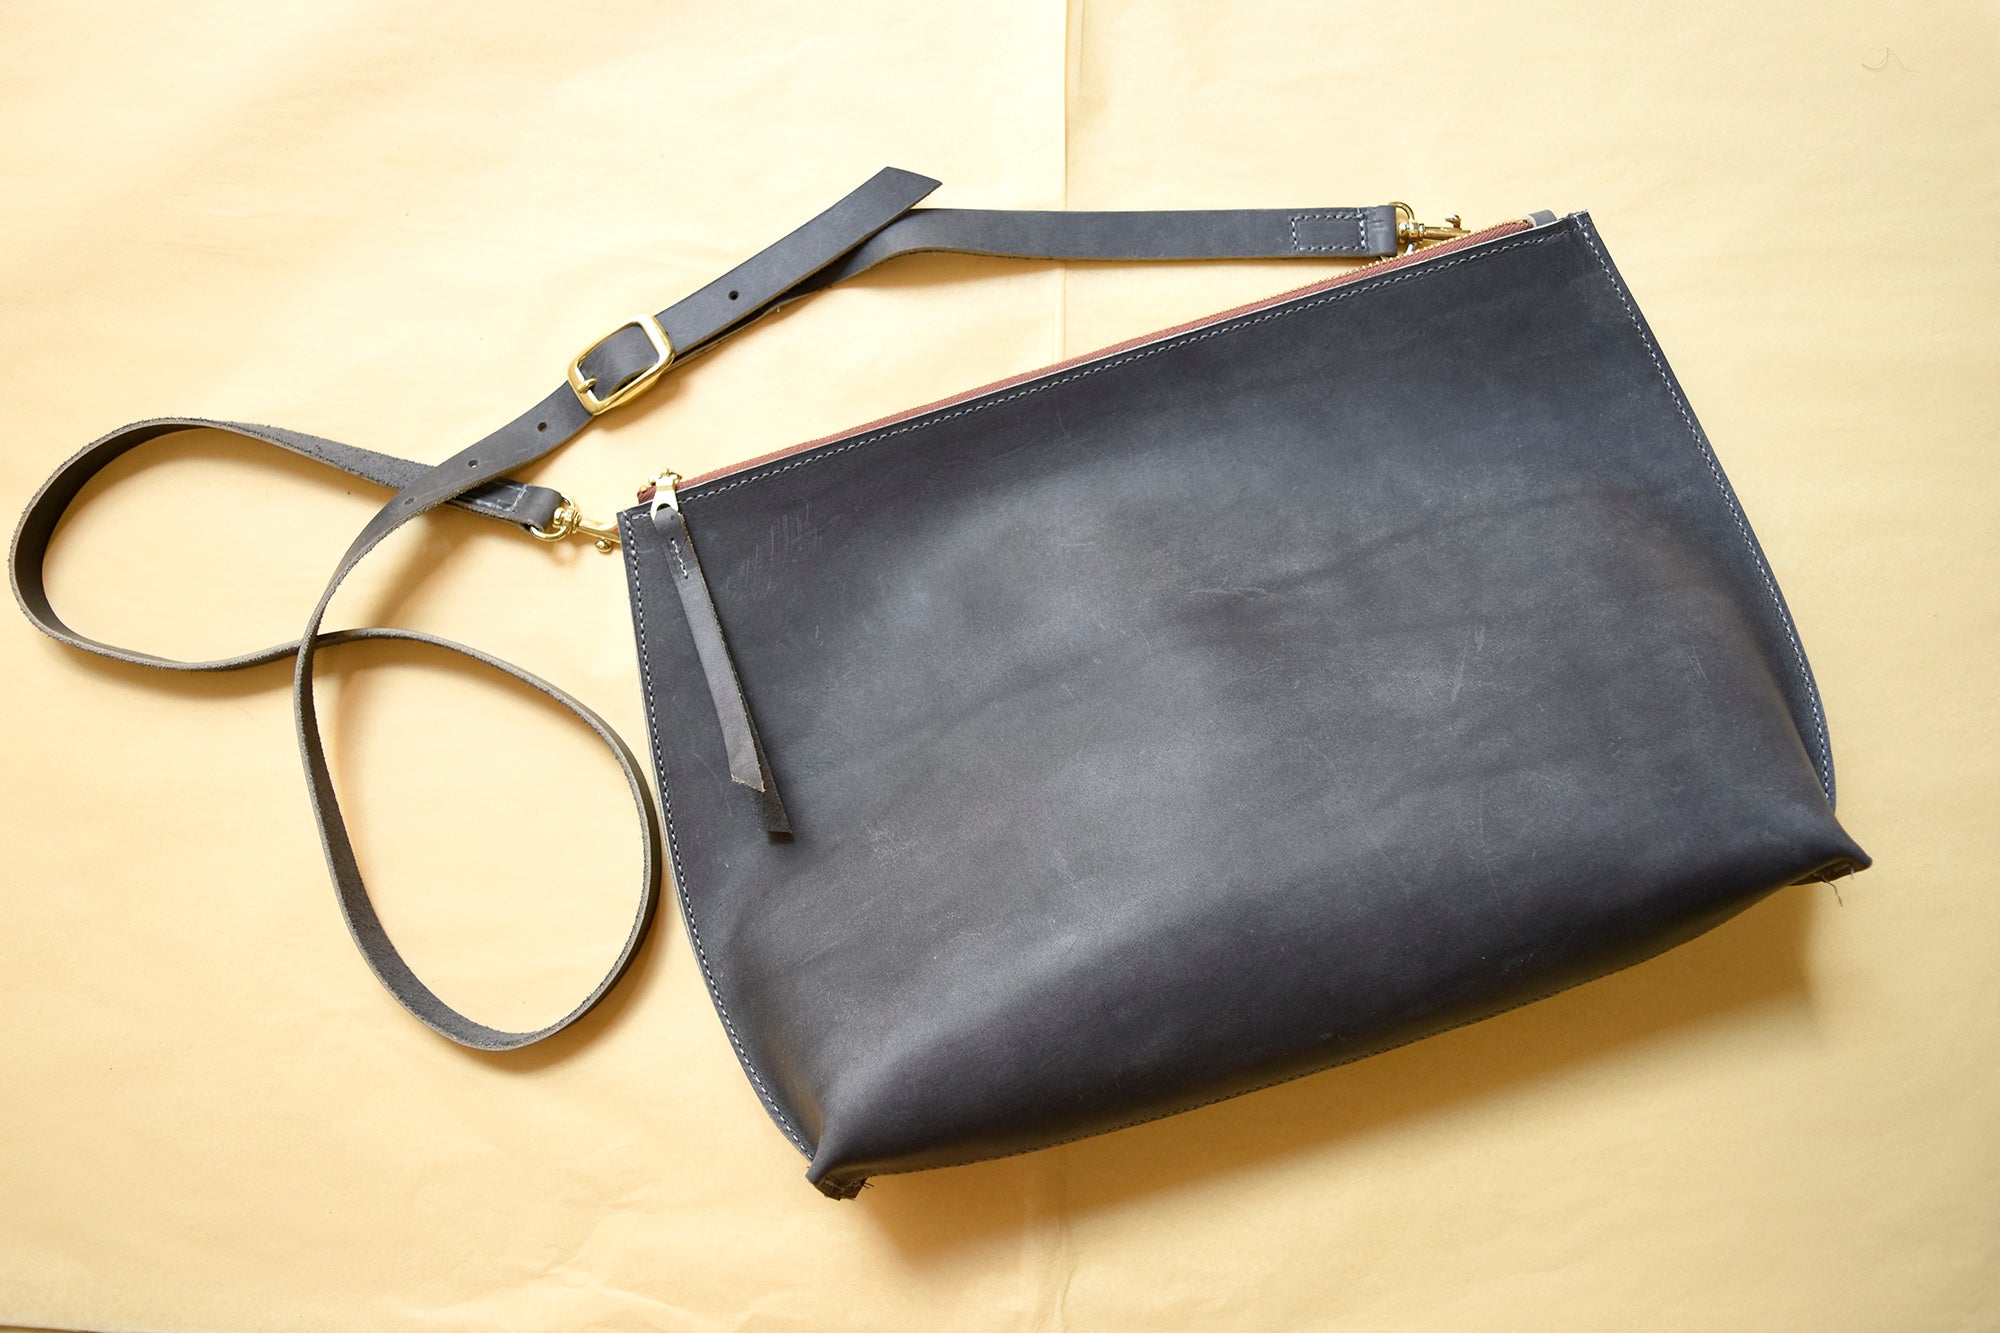 Small Cross Body Bag in Genuine Leather